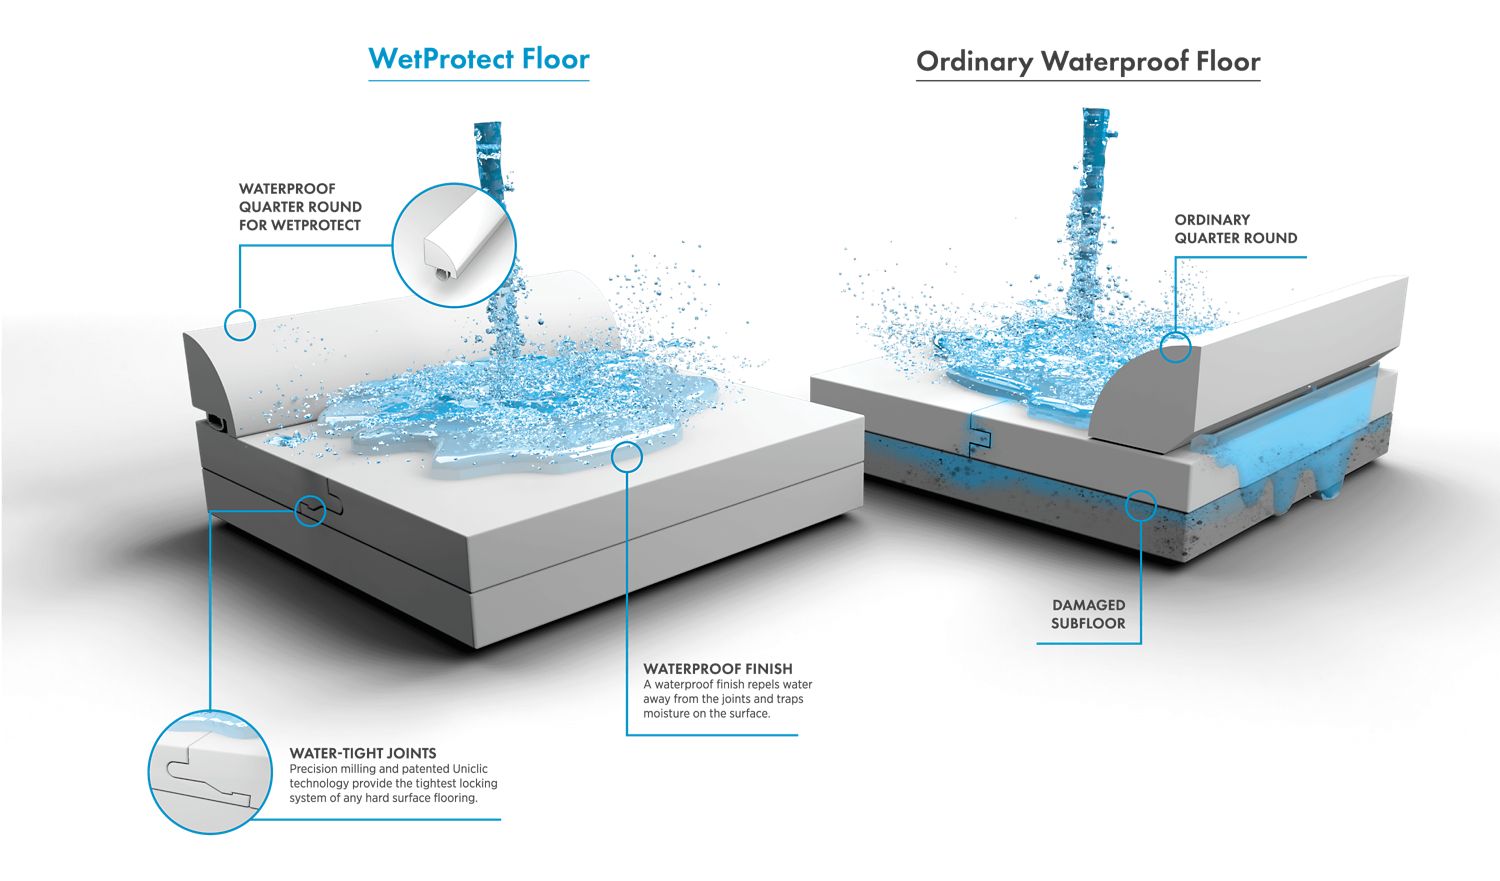 WetProtect technology for waterproof floors